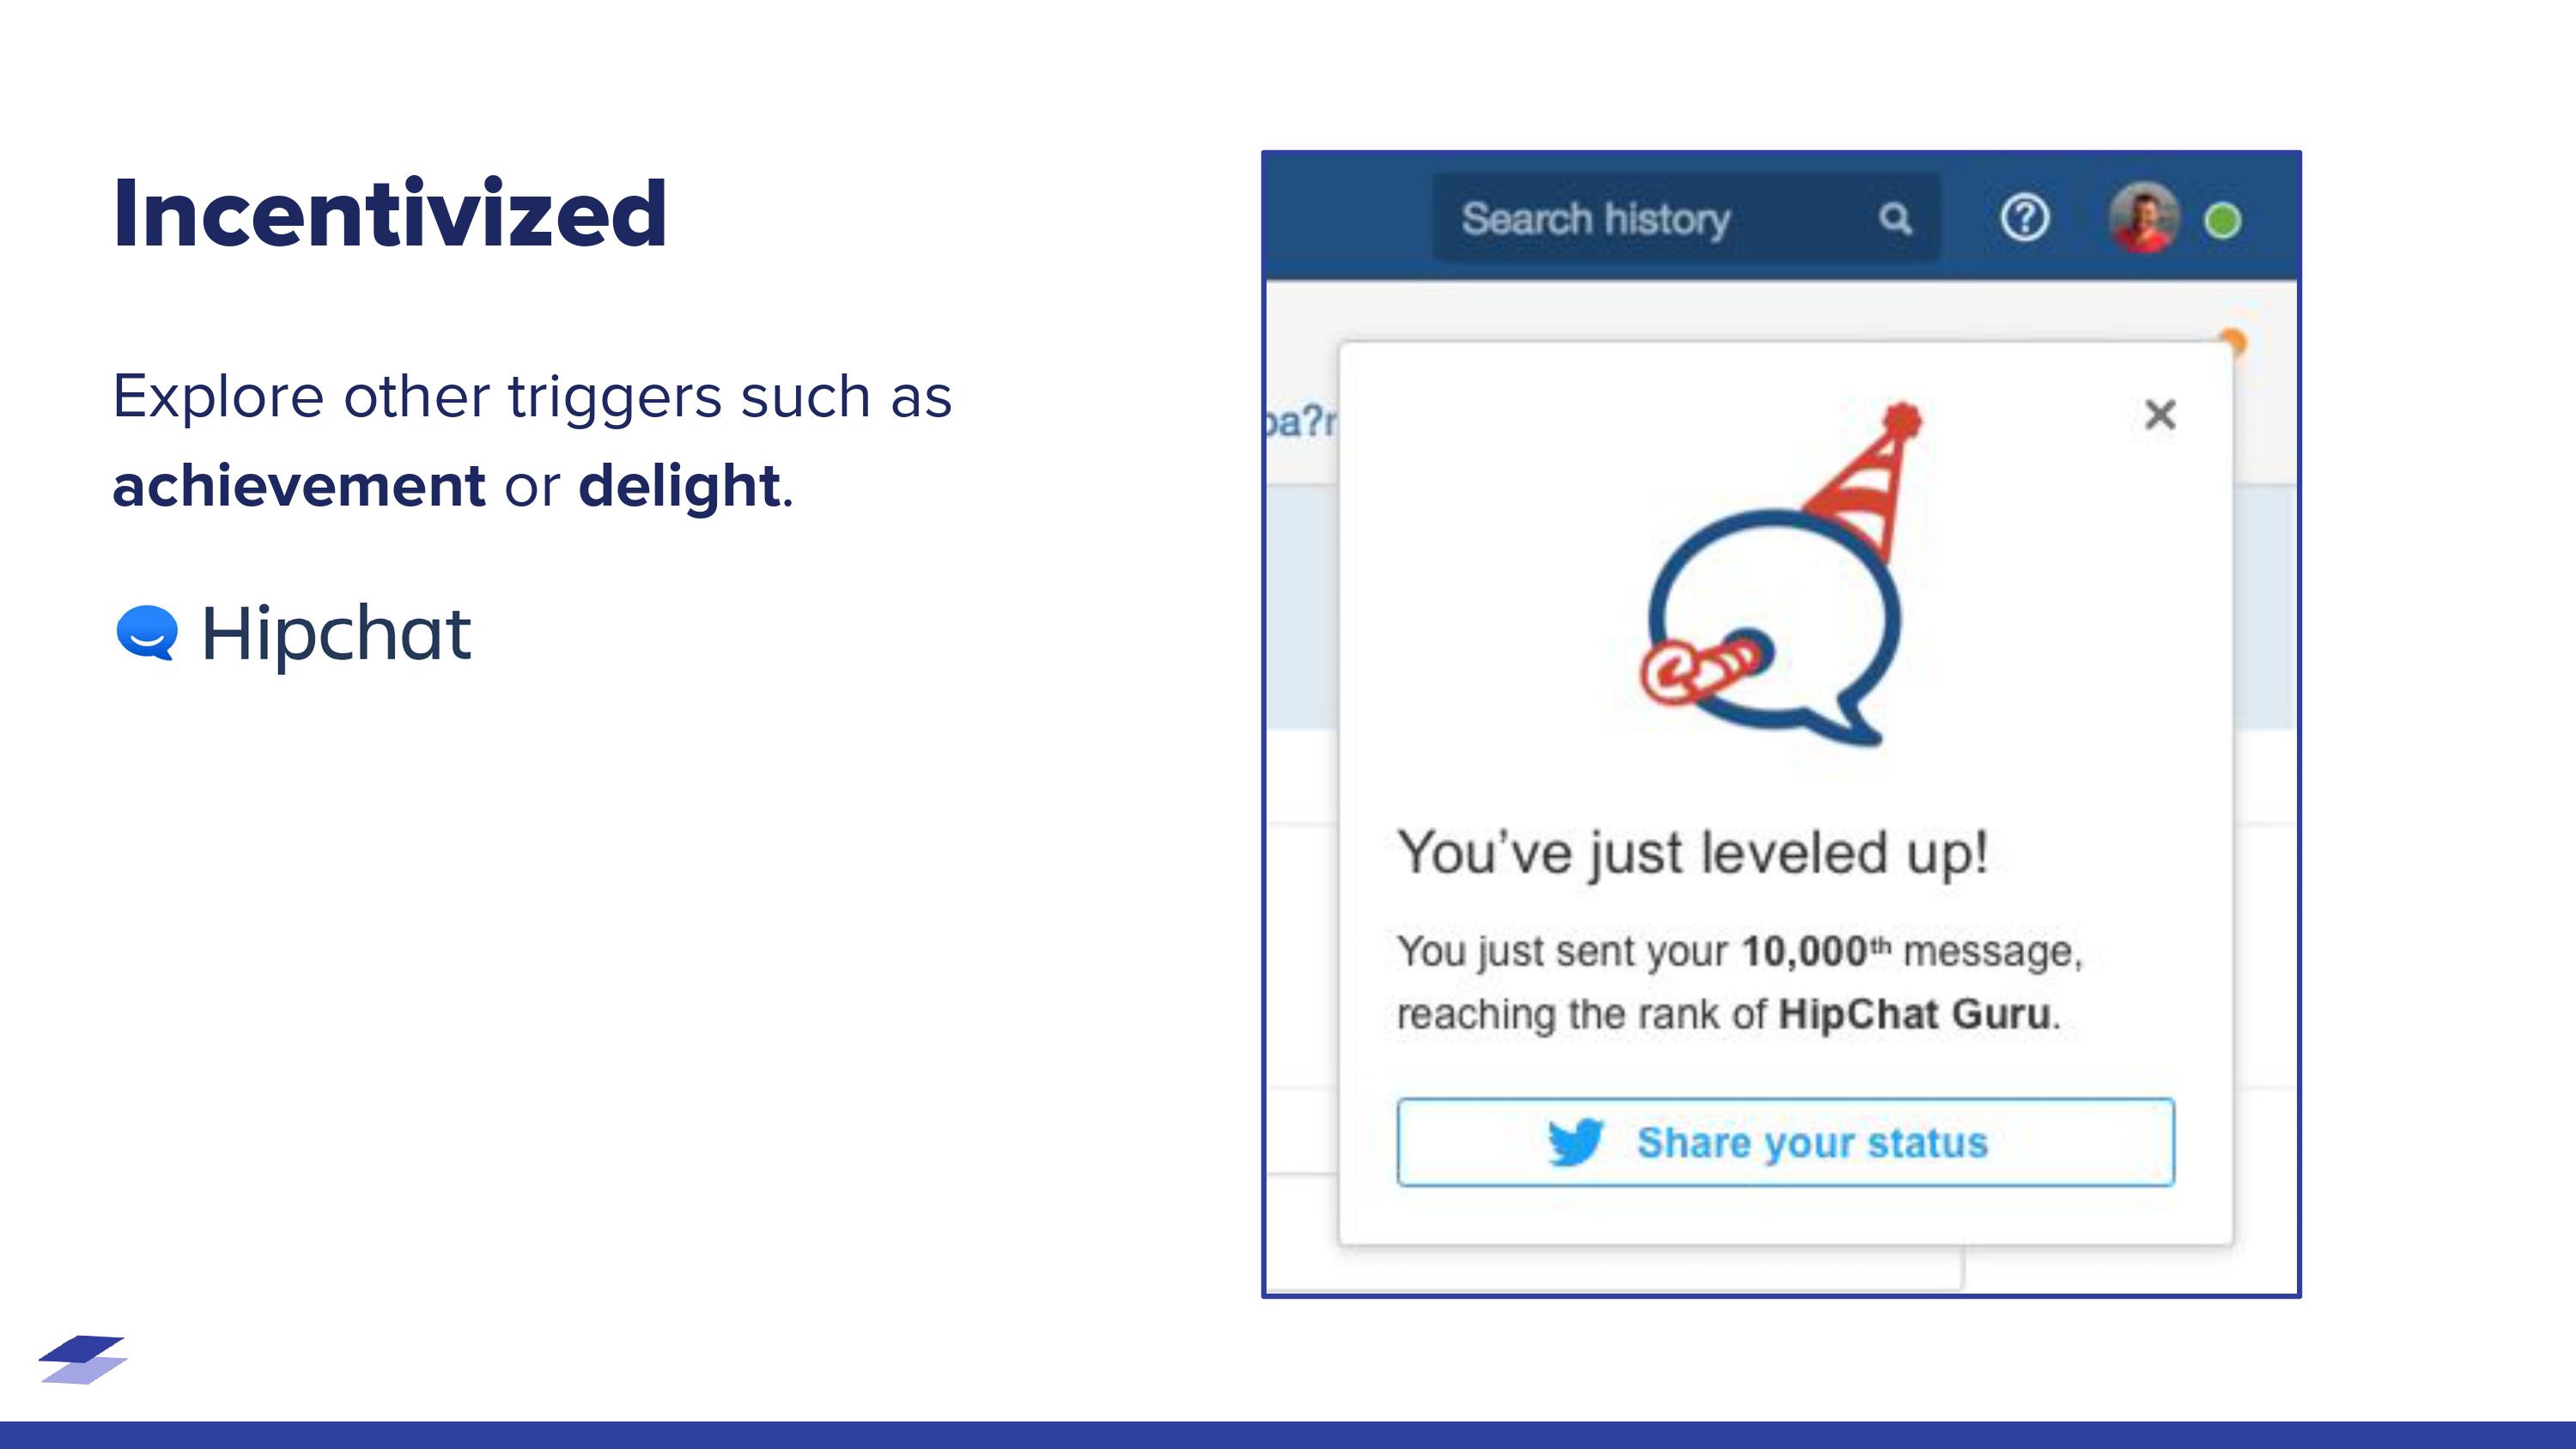 Hipchat enables users to share their milestones with their network